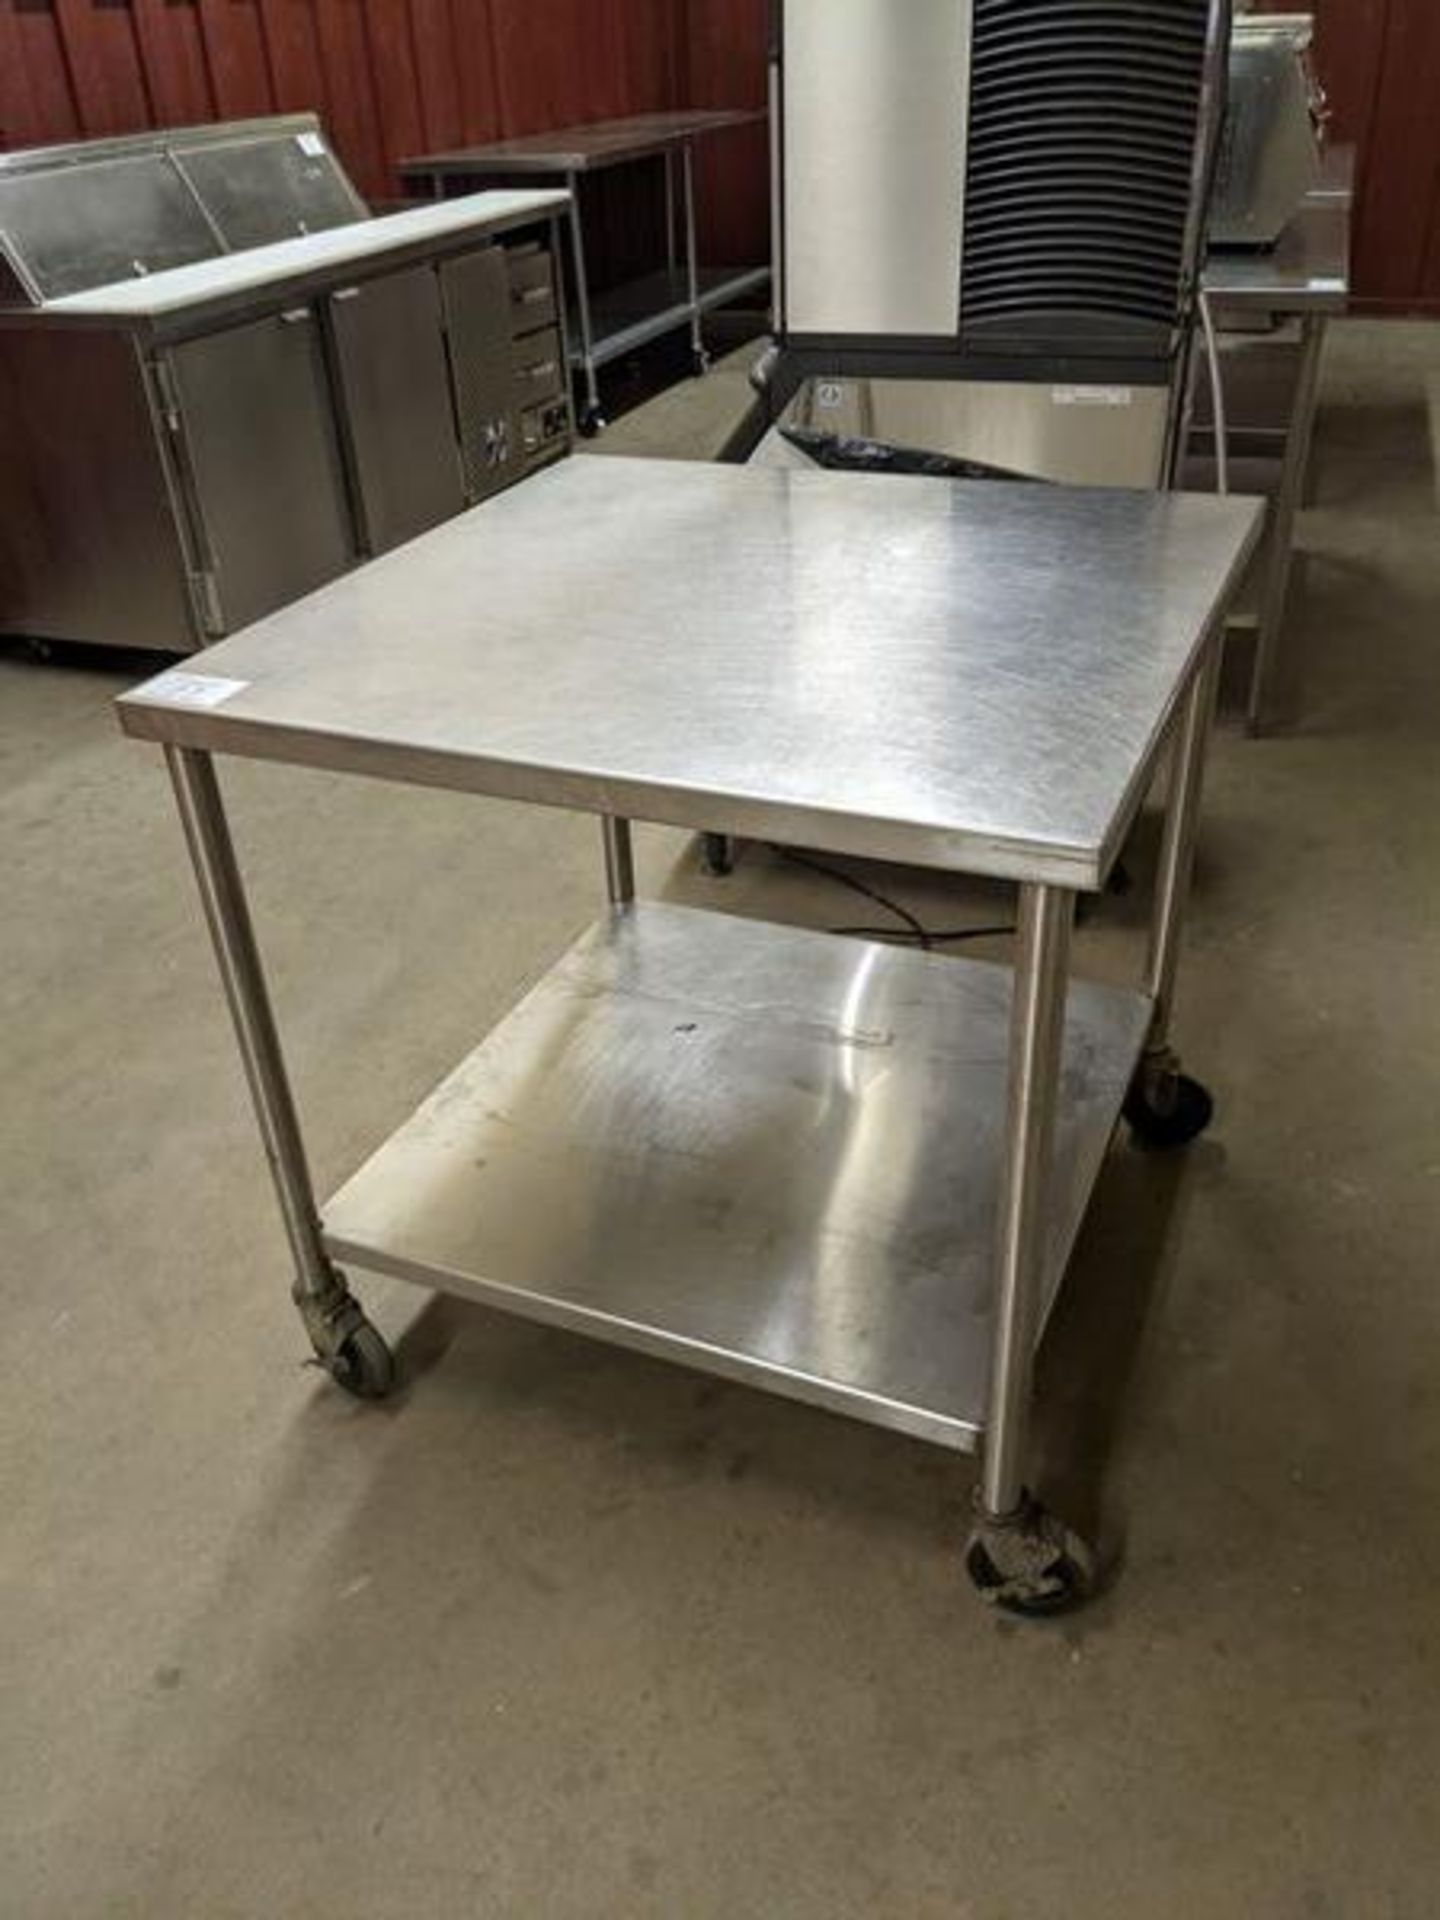 36 x 36" Stainless Steel Work Table